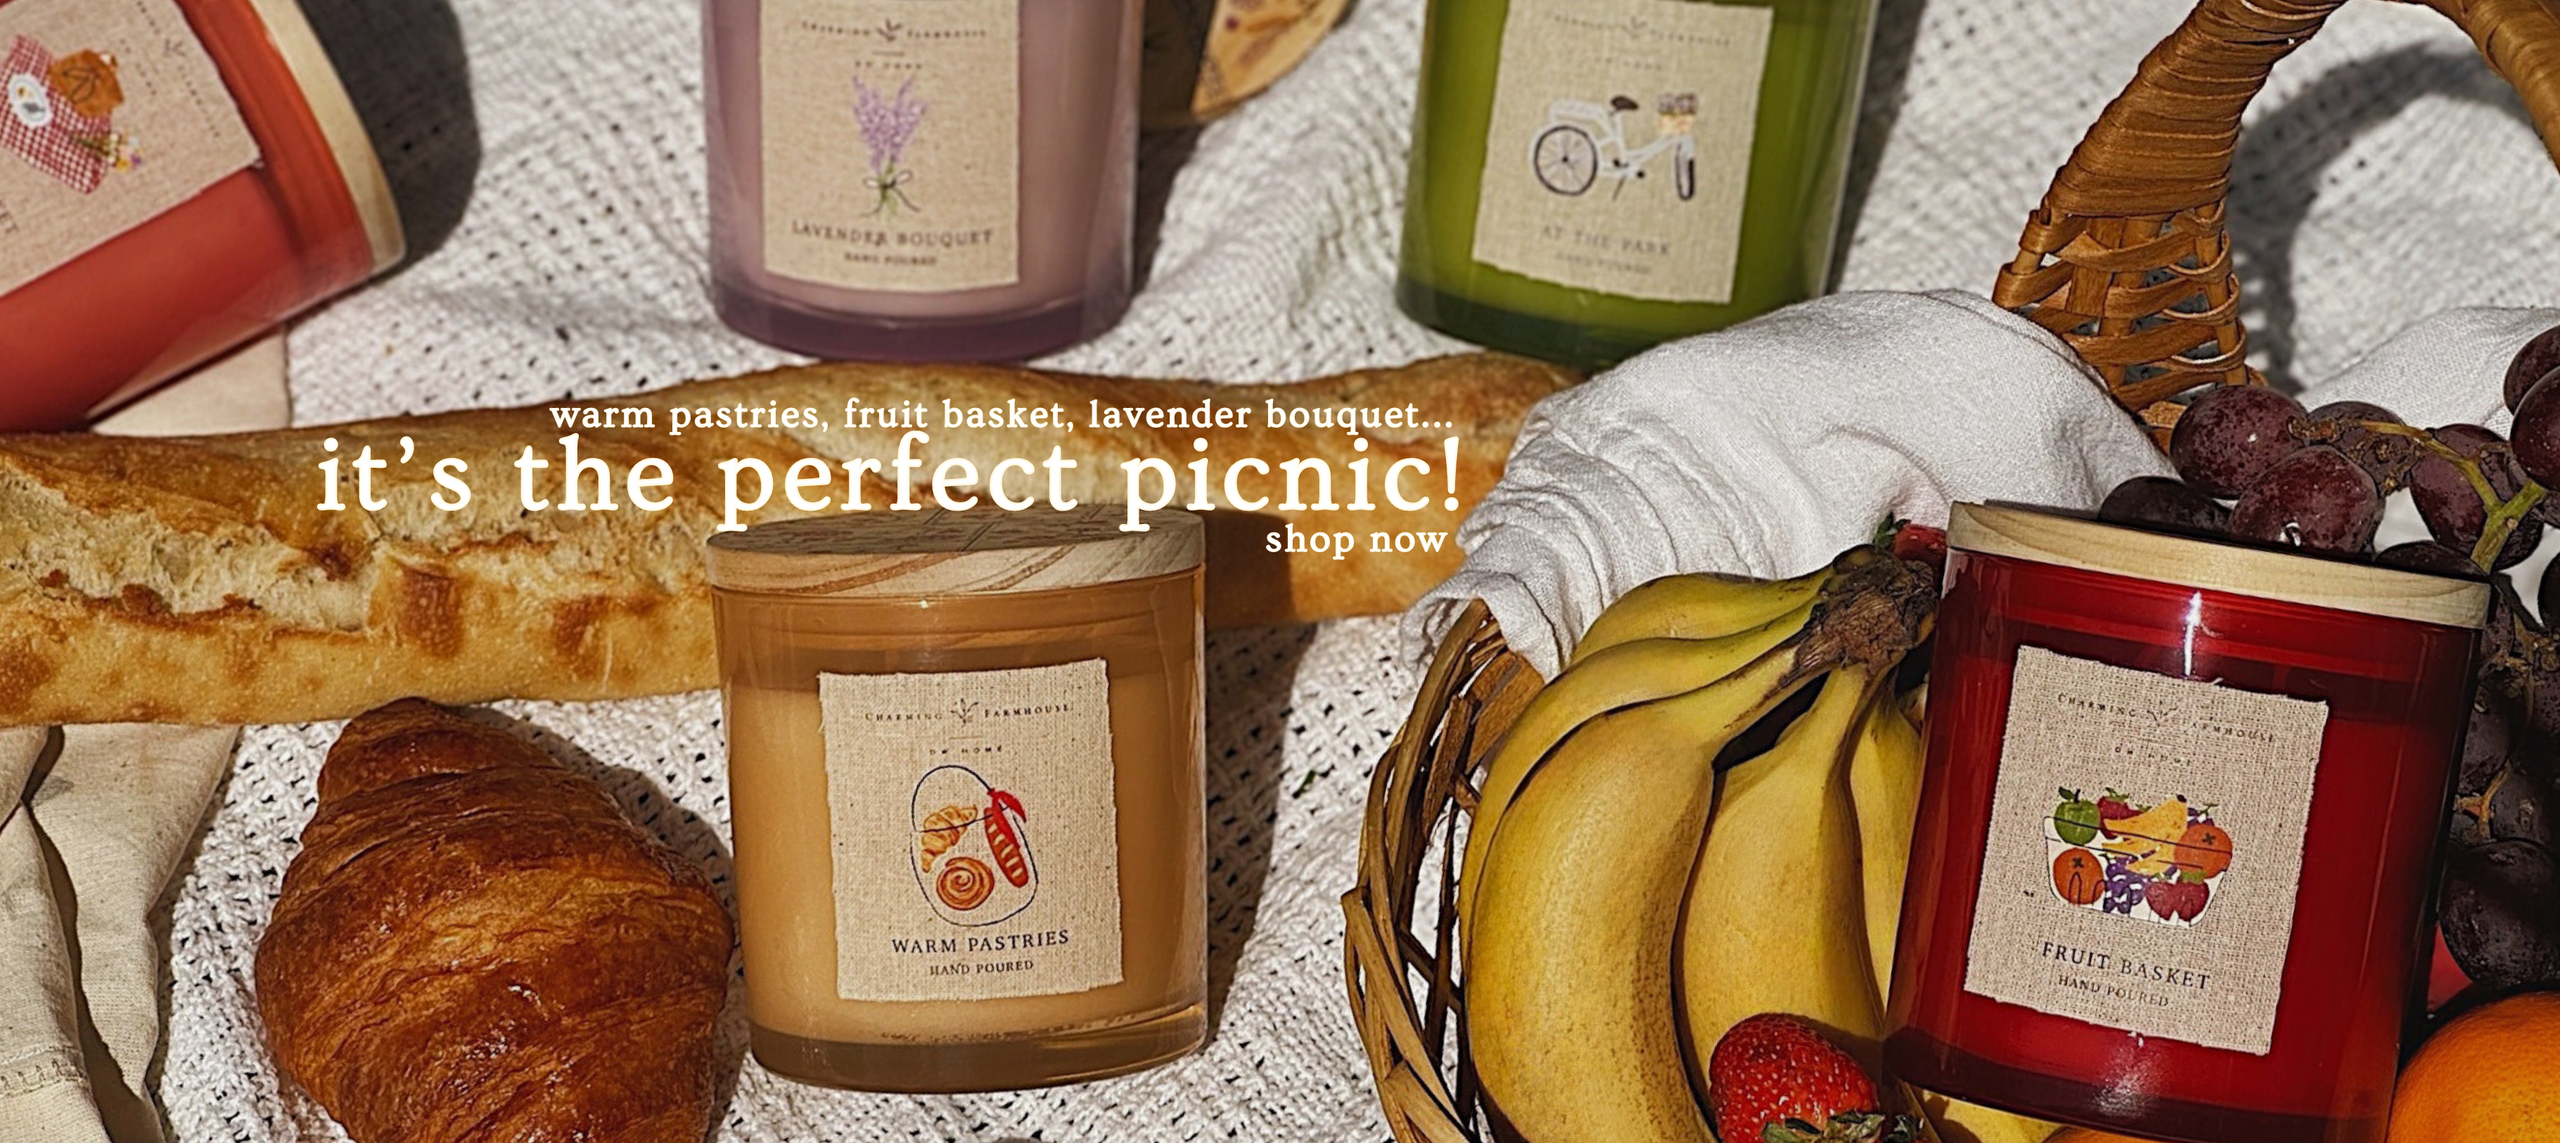 Charming Farmhouse banner image of candles, fruits, and baked goods on a blanket.